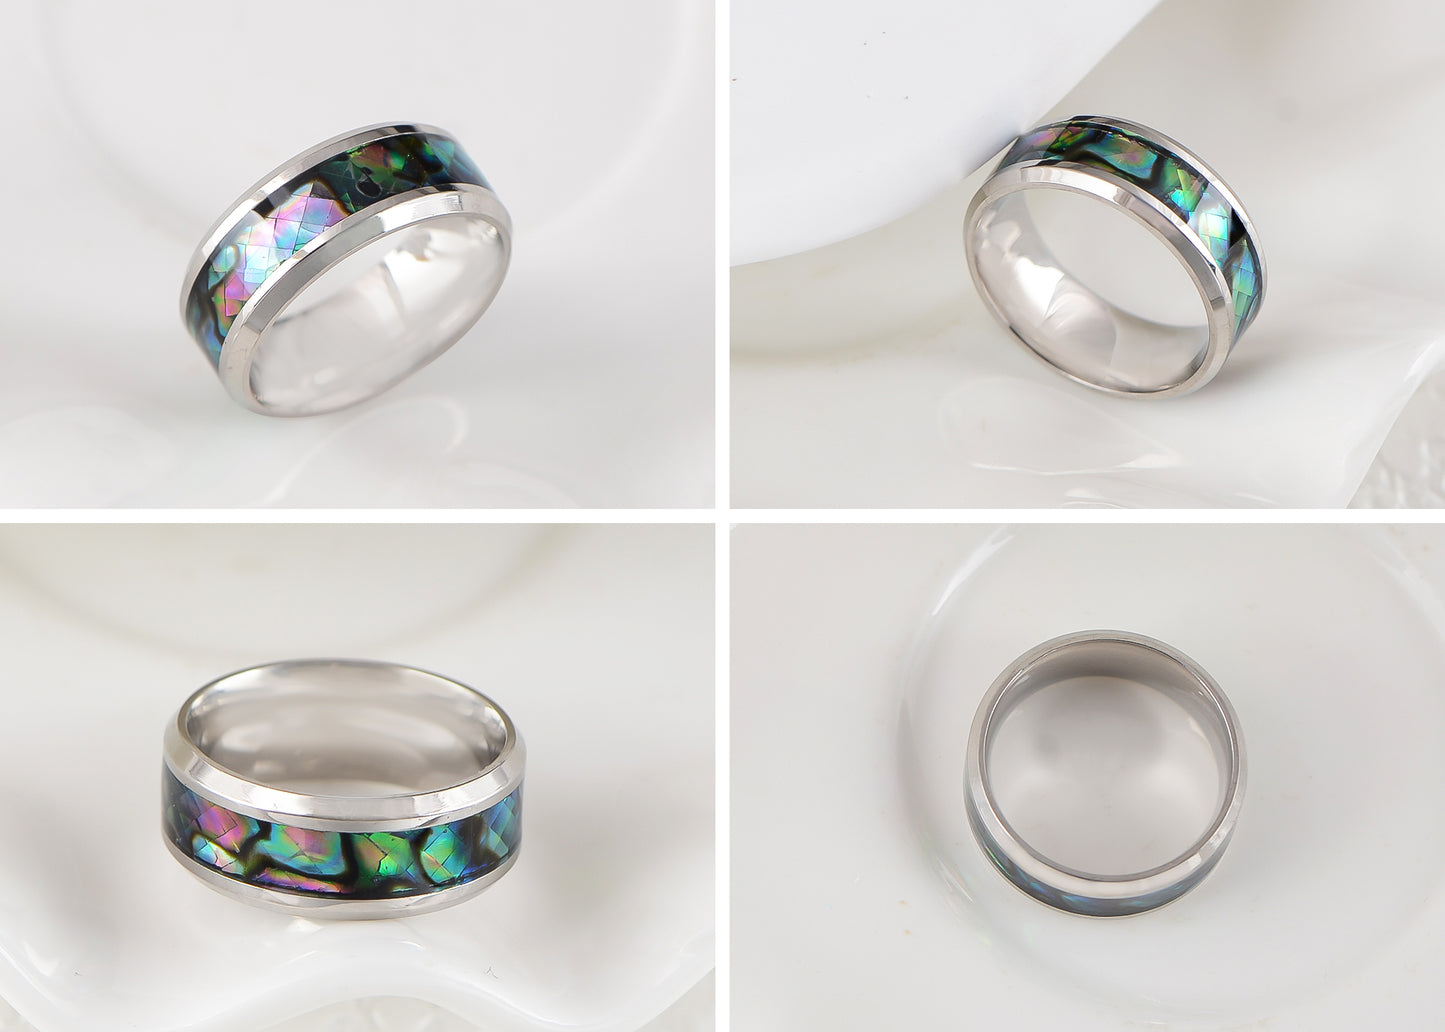 Alialng Abalone Shell Inlay Promise Rings for Men Women Couples Wedding Band